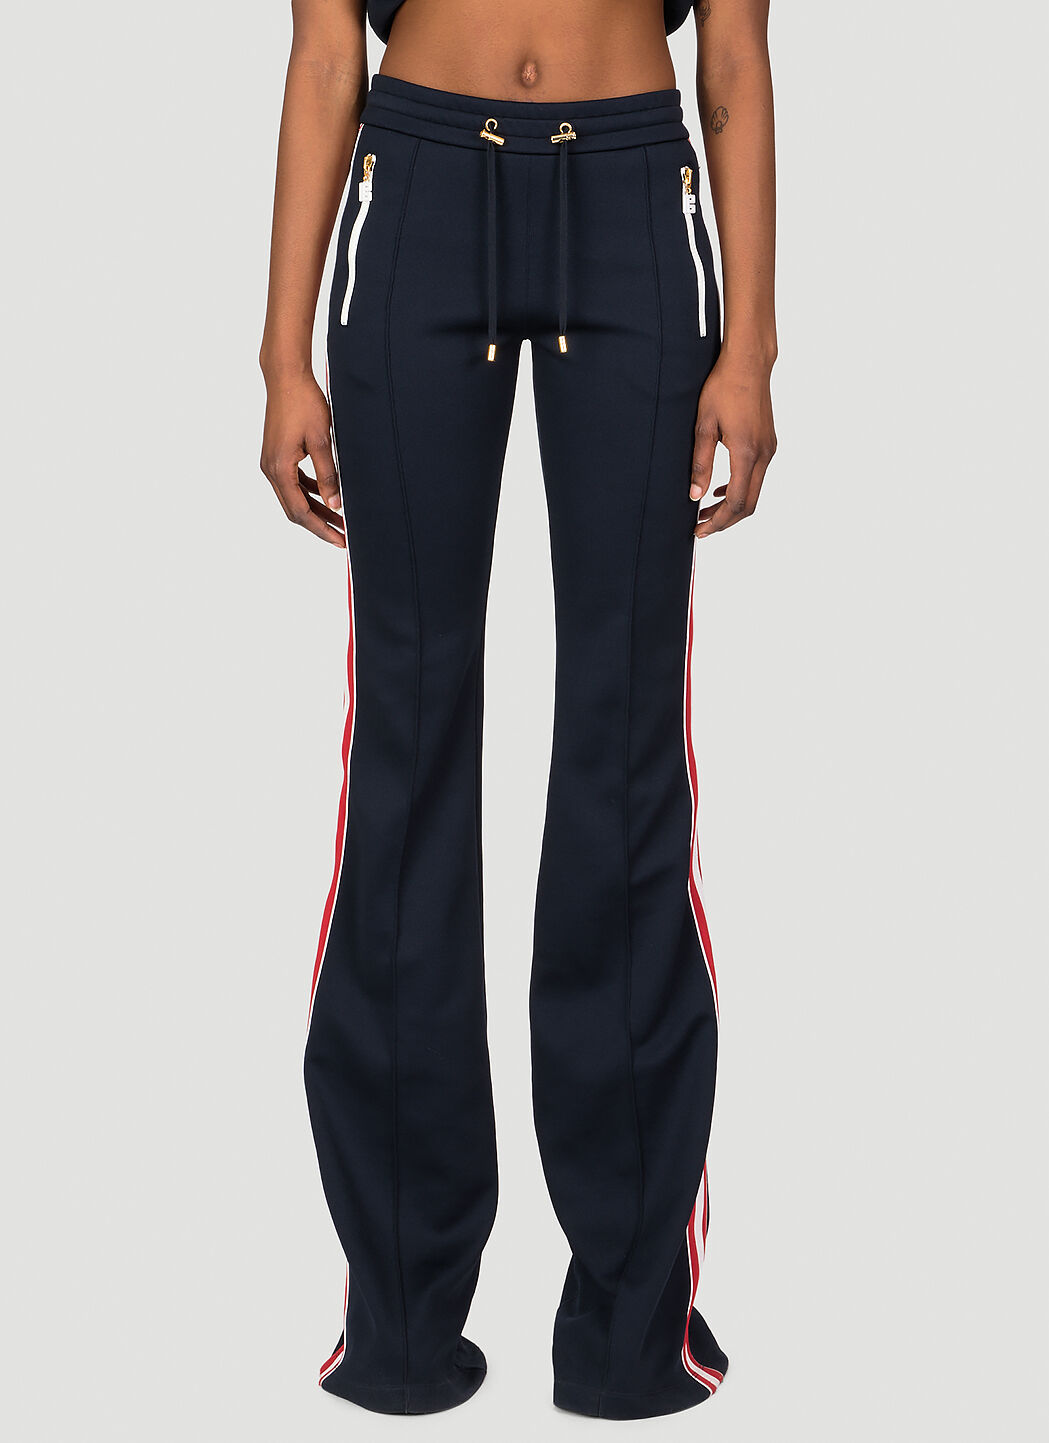 Alexander Wang 70s Flare Track Pants Blue awg0255038